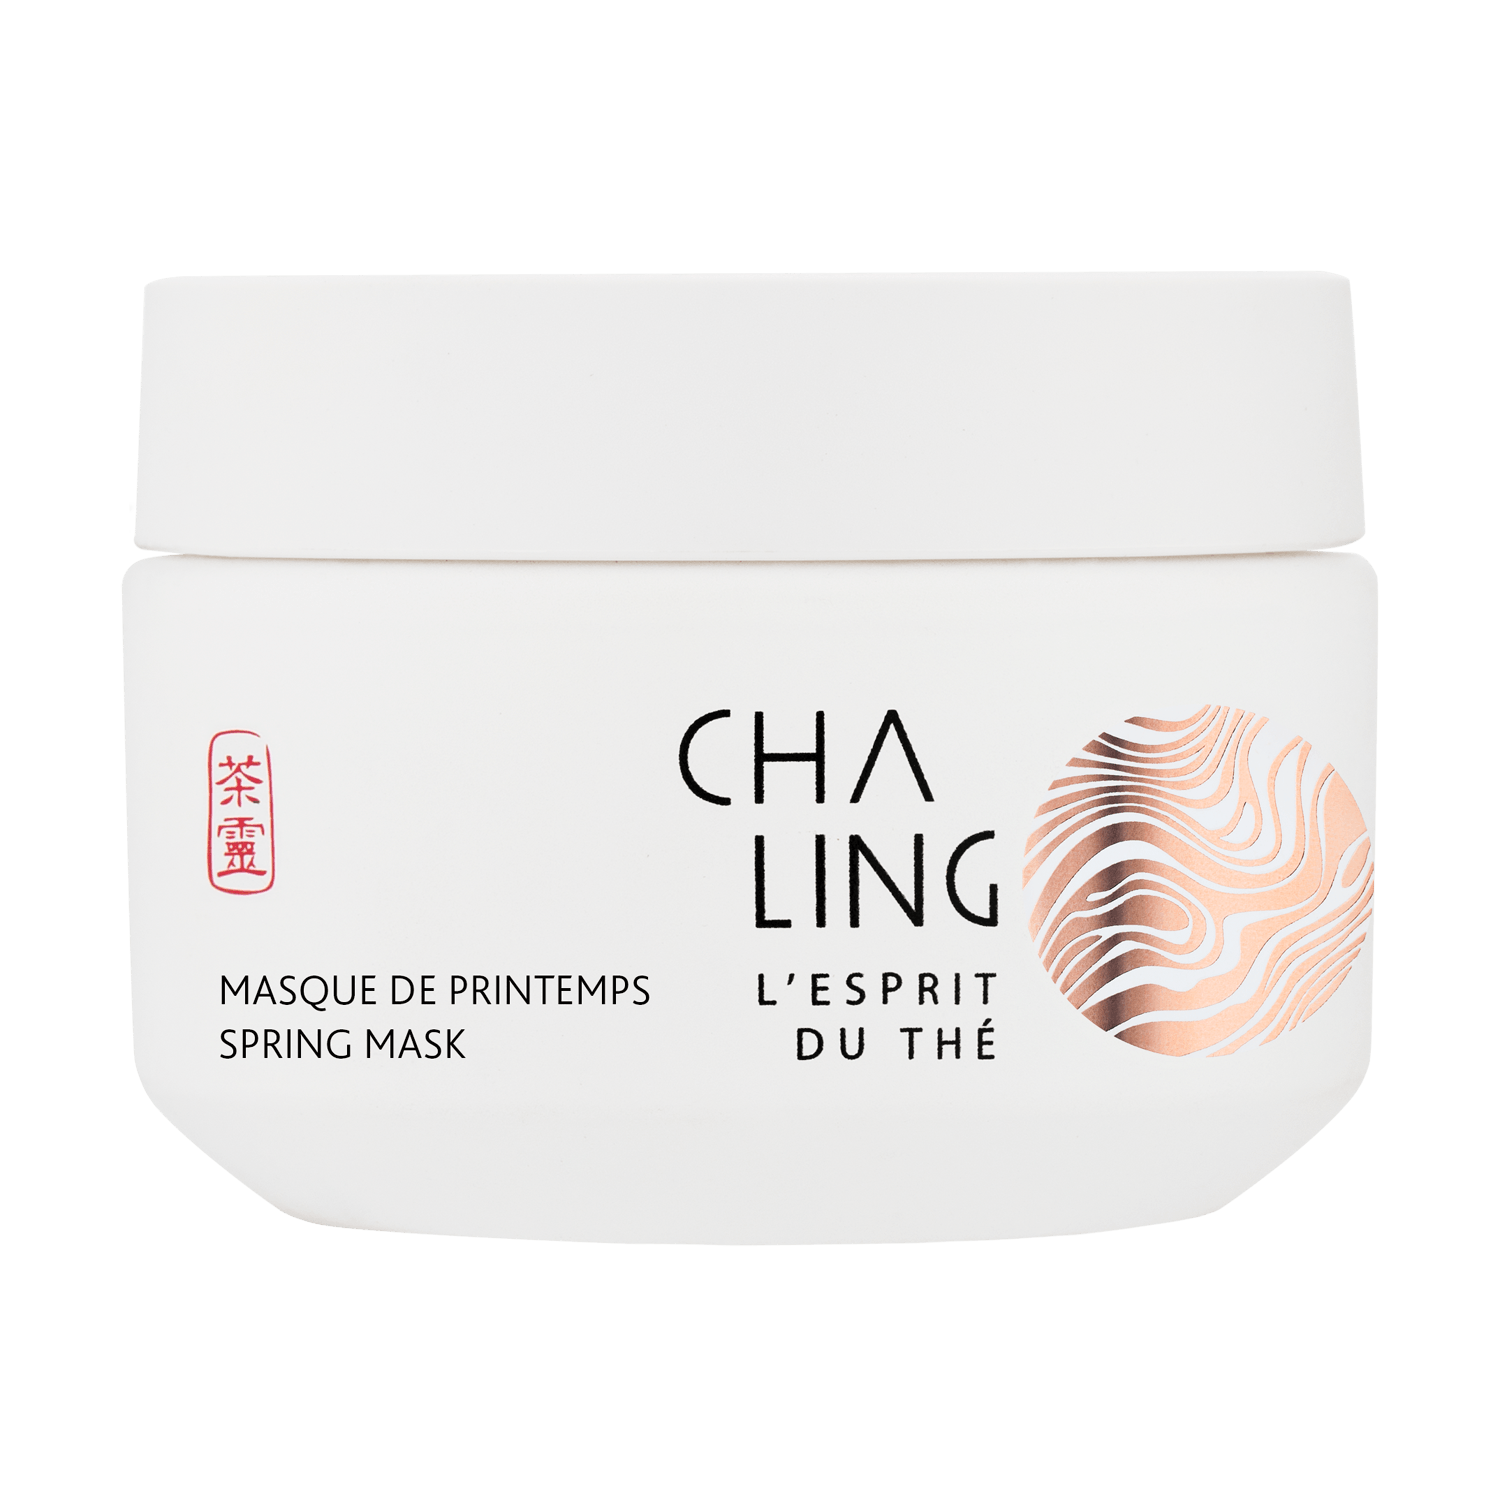 What Cha Ling has taught LVMH about selling beauty in China